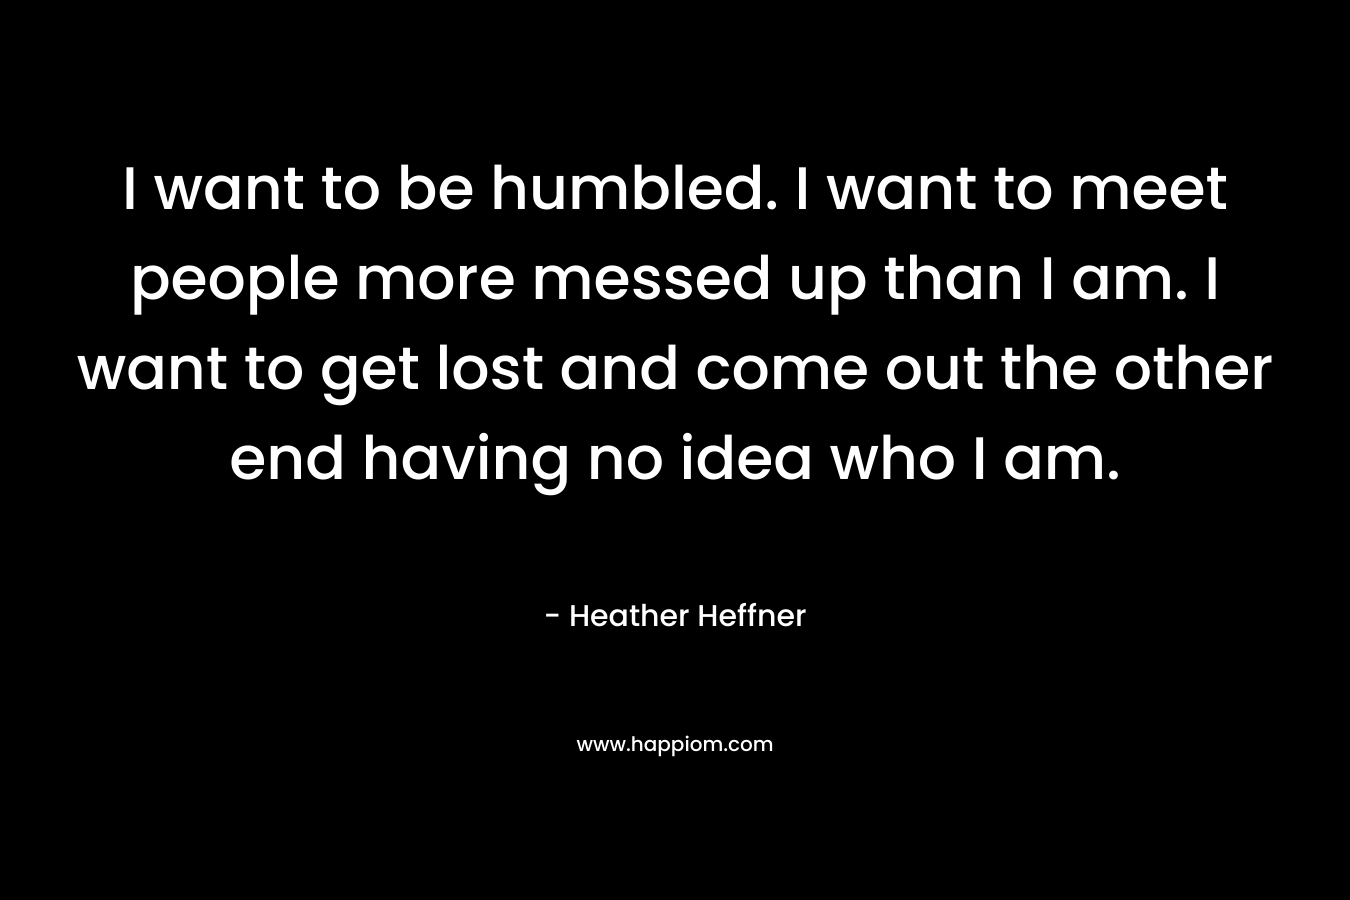 I want to be humbled. I want to meet people more messed up than I am. I want to get lost and come out the other end having no idea who I am.